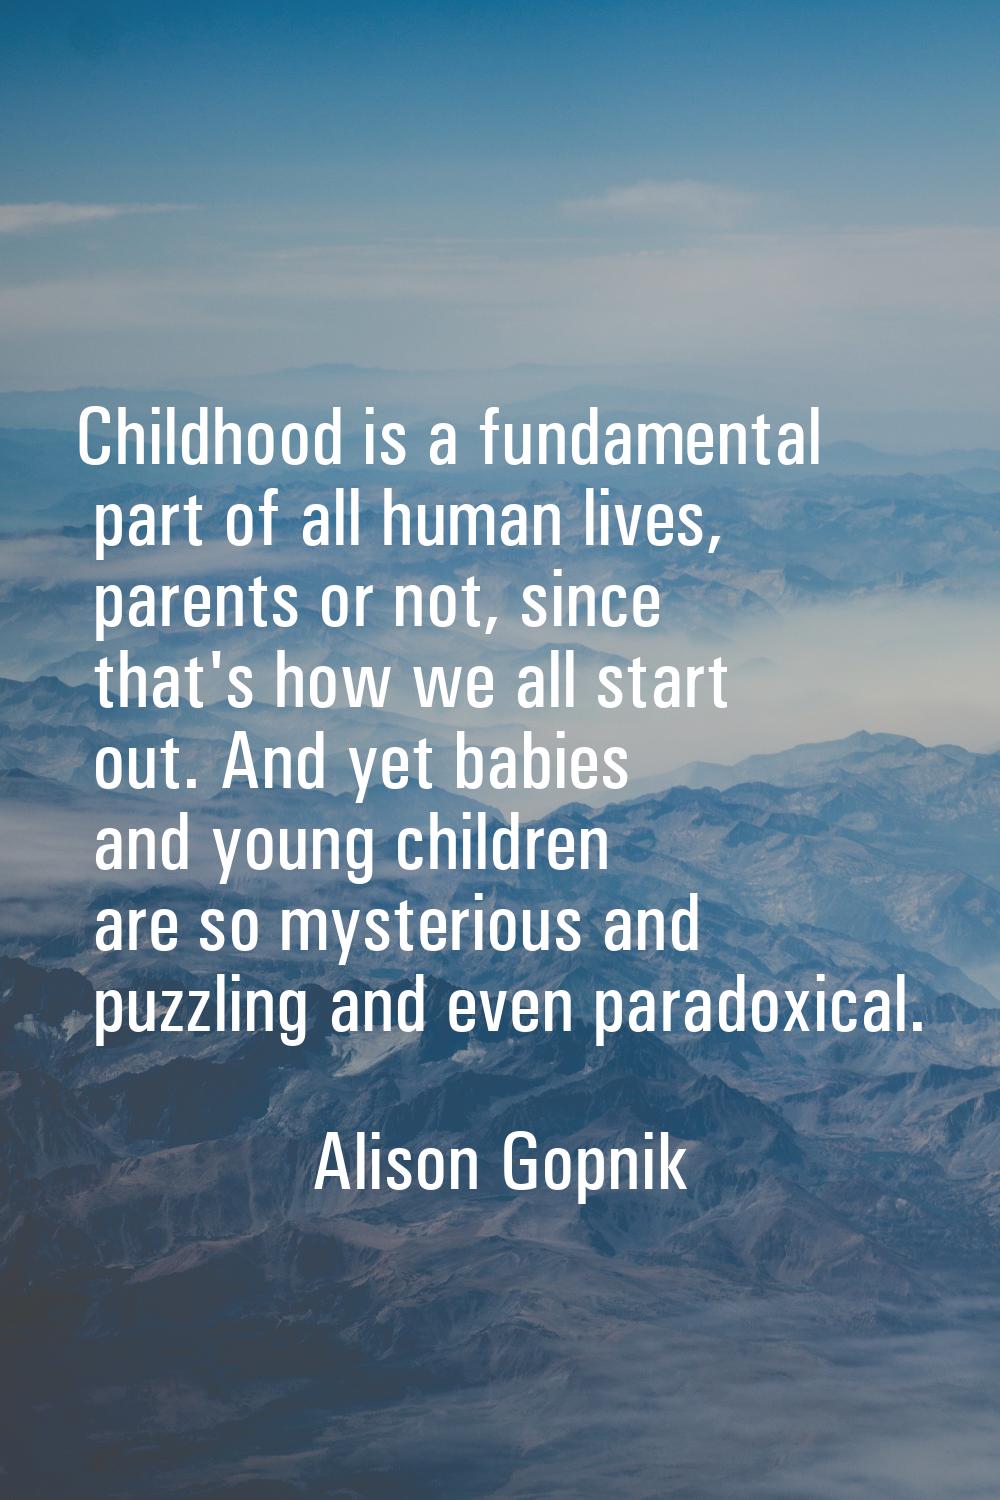 Childhood is a fundamental part of all human lives, parents or not, since that's how we all start o